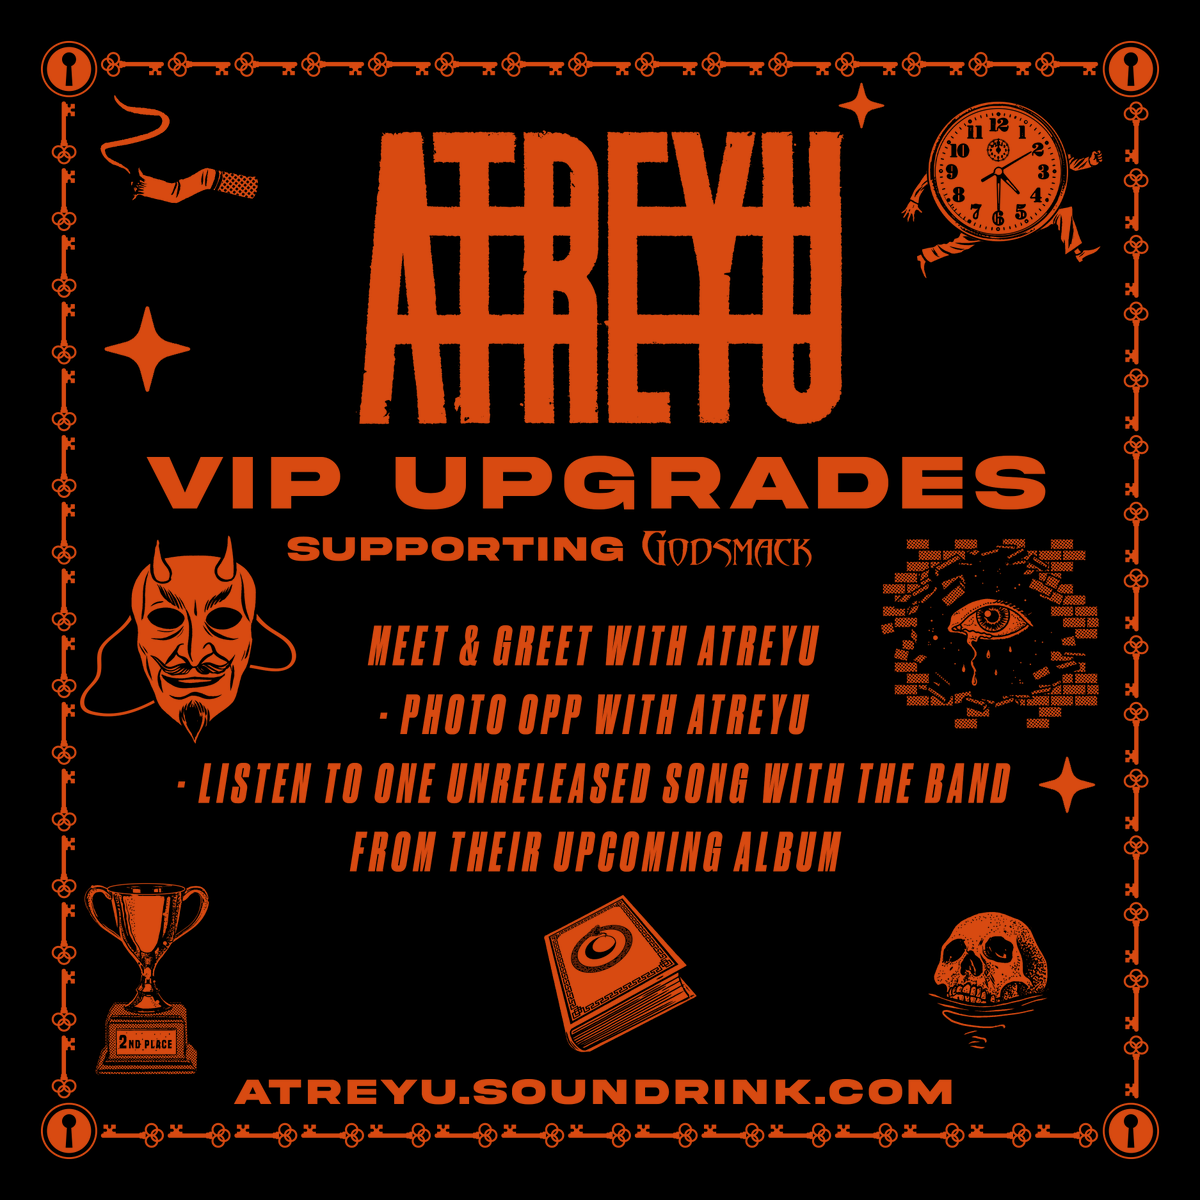 VIP upgrades are available now for our shows supporting @godsmack! Get yours now at atreyu.soundrink.com

Sep 03 | Baton Rouge, LA
Sep 05 | Pensacola, FL
Sep 06 | Jacksonville, FL
Sep 07 | Charleston, SC
Sep 09 | Tampa, FL
Sep 10 | Hollywood, FL